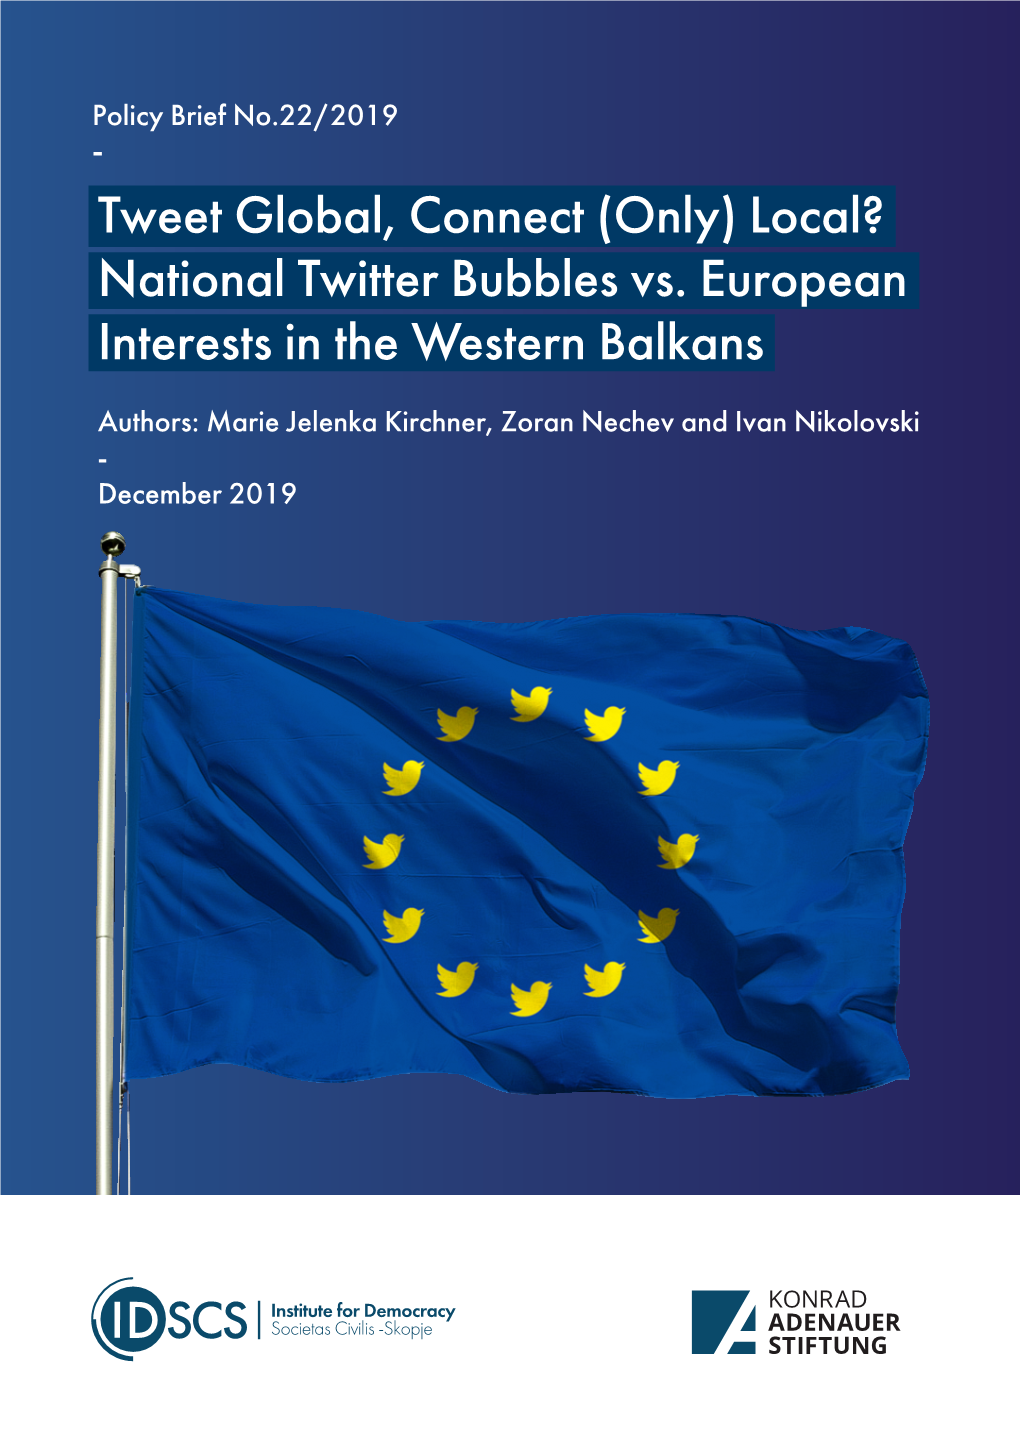 National Twitter Bubbles Vs. European Interests in the Western Balkans